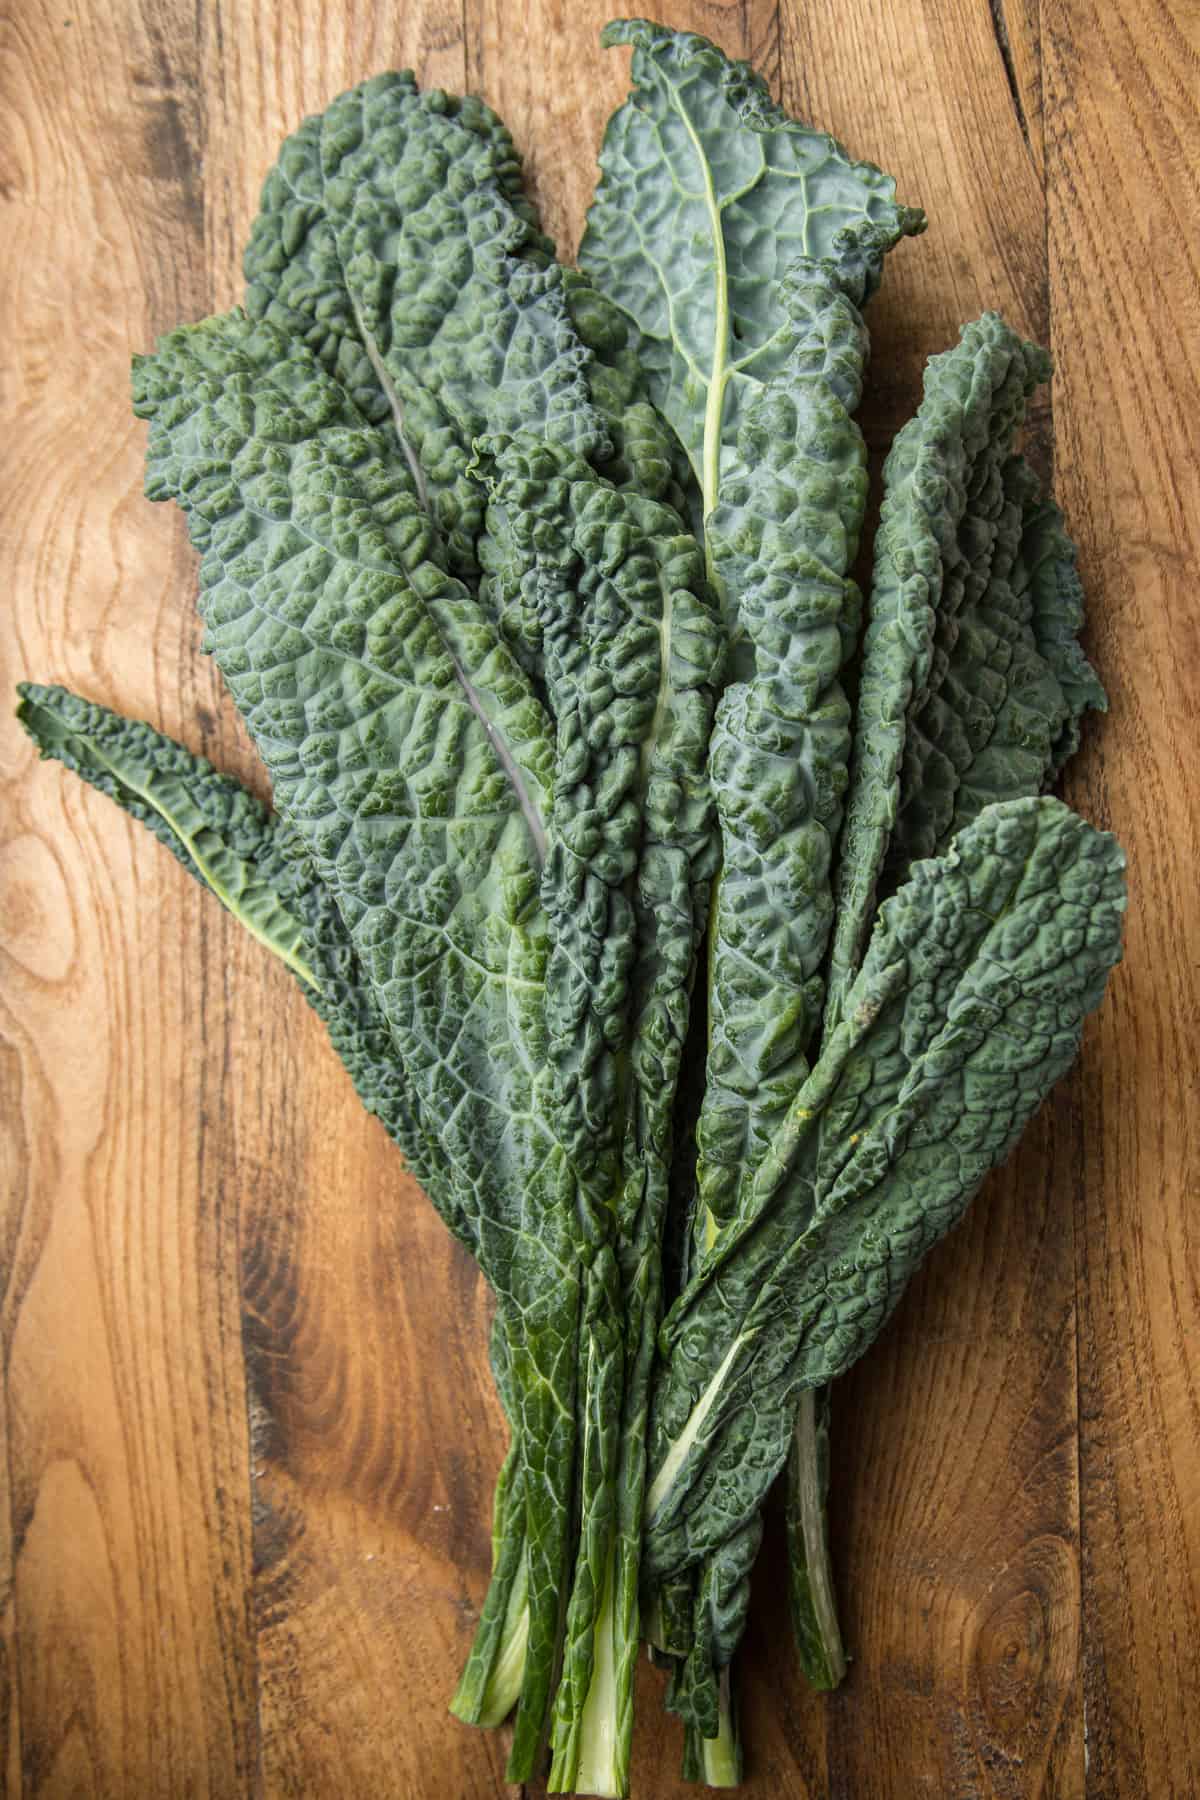 Bunch of Lacinato Kale on a Wood Surface.